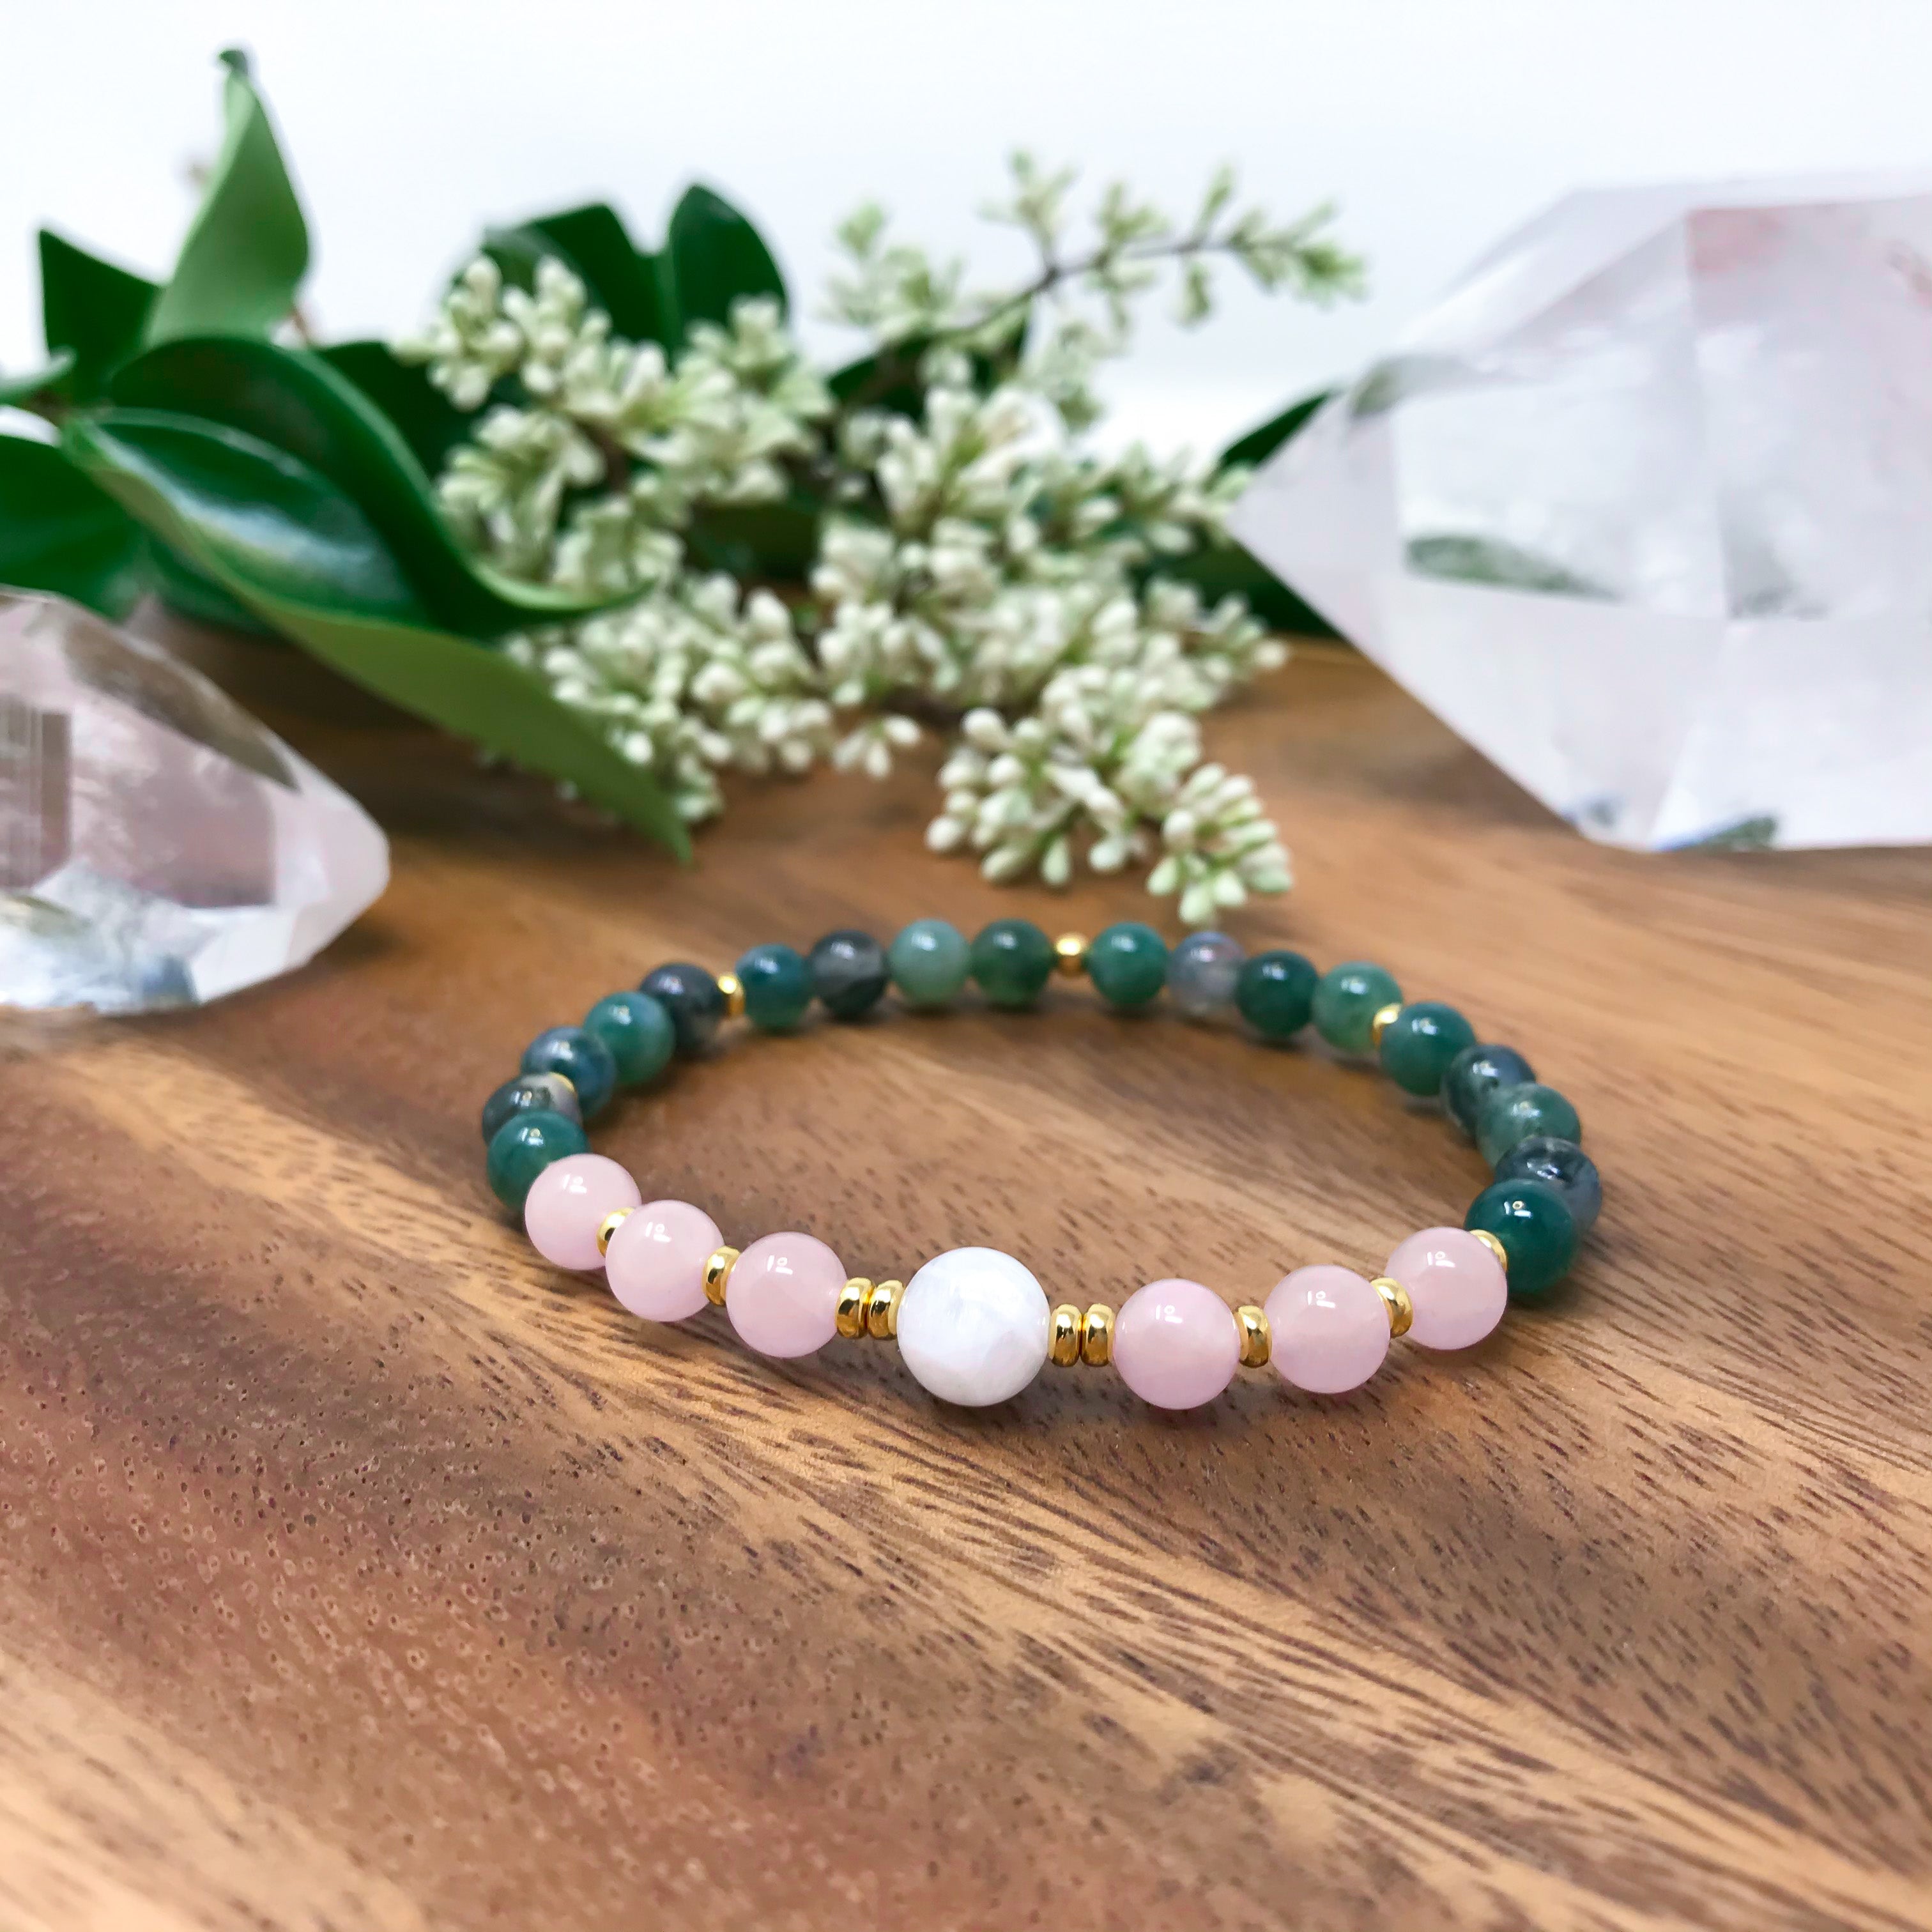 Green Moss Agate, light pink Rose Quartz and white Moonstone yoga bracelet with gold or silver accents.